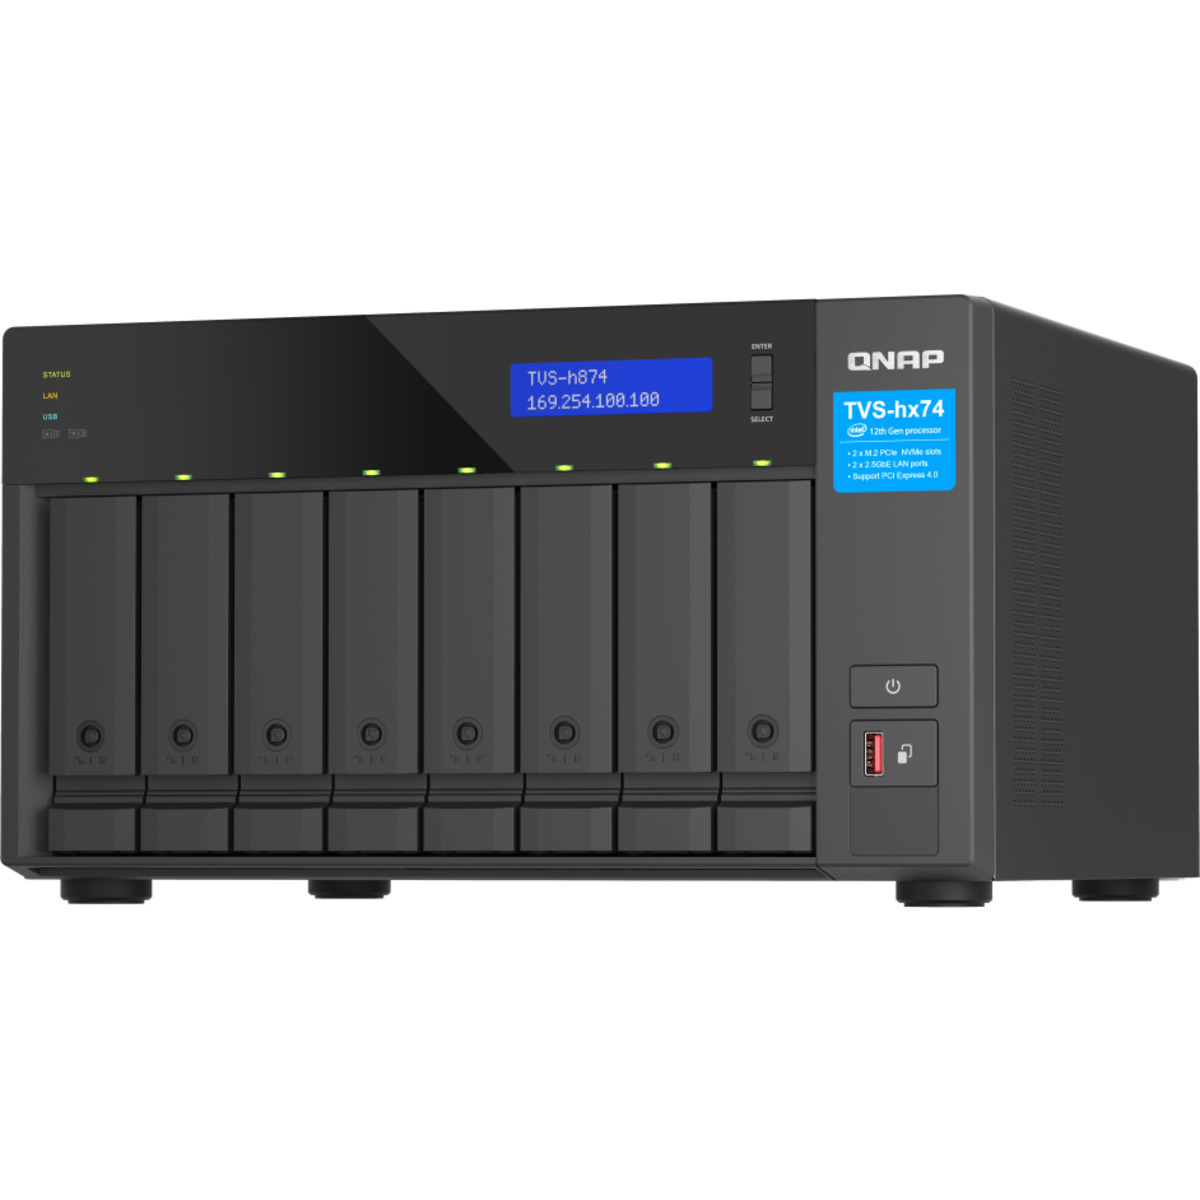 QNAP TVS-h874 Core i7 48tb 8-Bay Desktop Multimedia / Power User / Business NAS - Network Attached Storage Device 4x12tb Western Digital Red Pro WD121KFBX 3.5 7200rpm SATA 6Gb/s HDD NAS Class Drives Installed - Burn-In Tested TVS-h874 Core i7